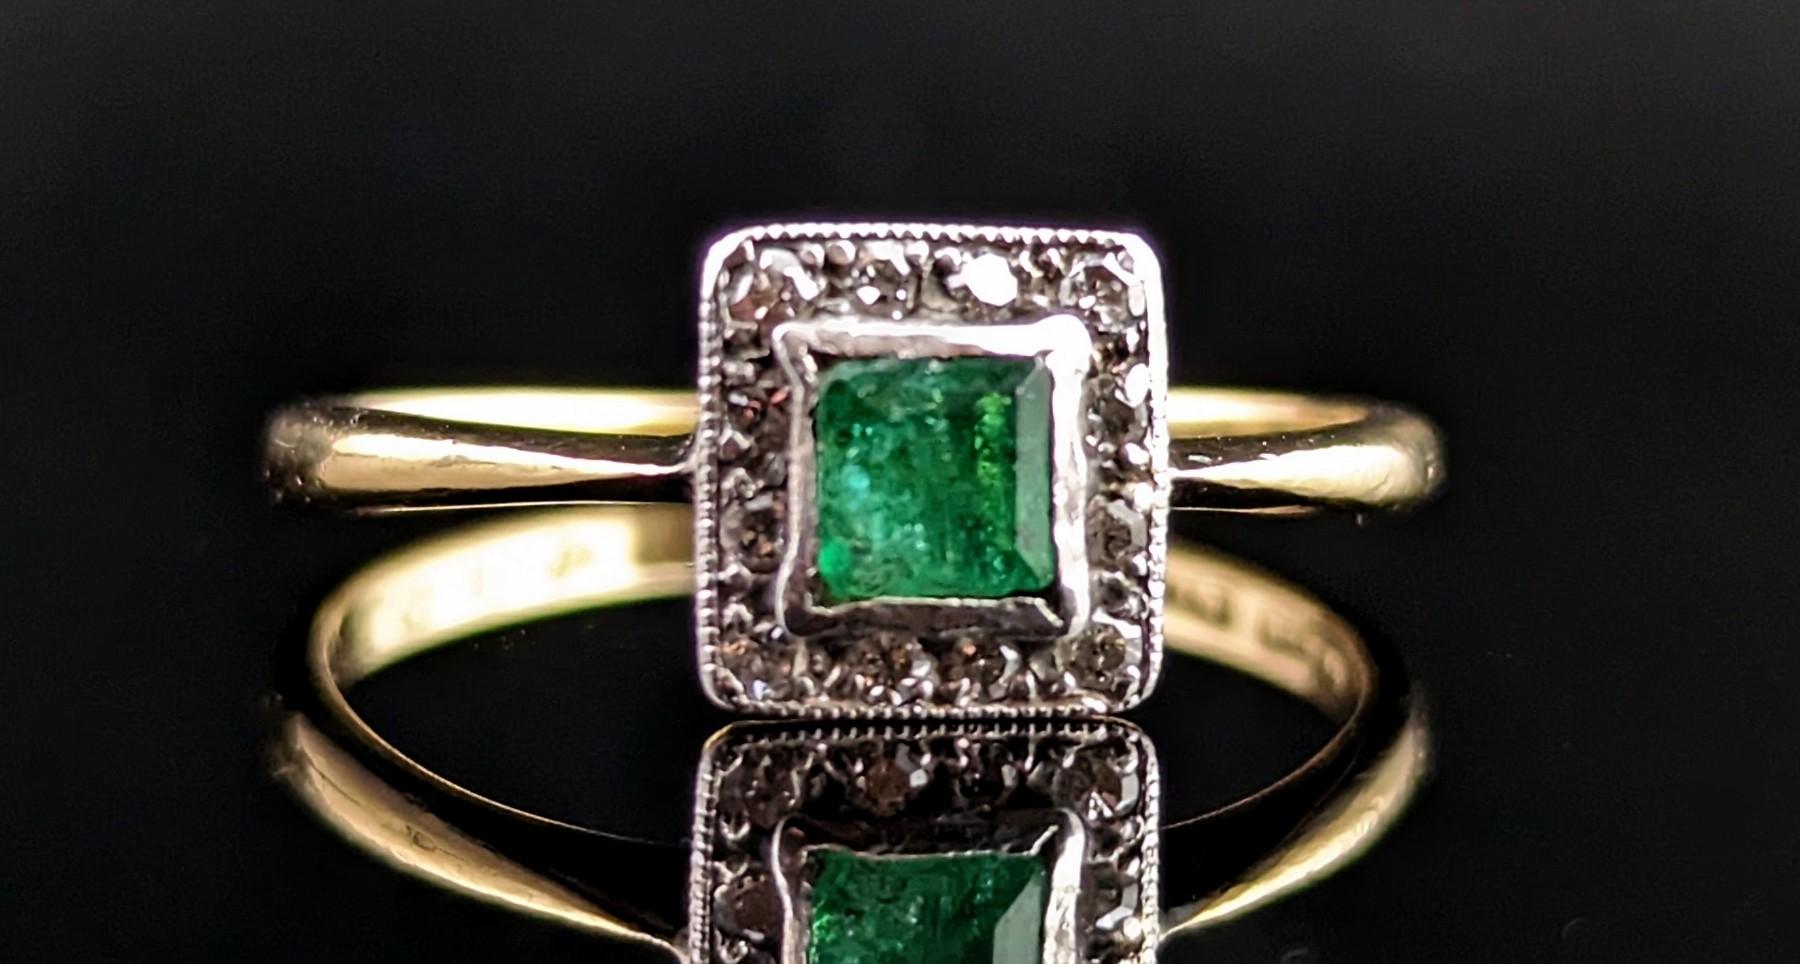 Vintage Art Deco Emerald and Diamond Ring, 18k Gold and Platinum 2